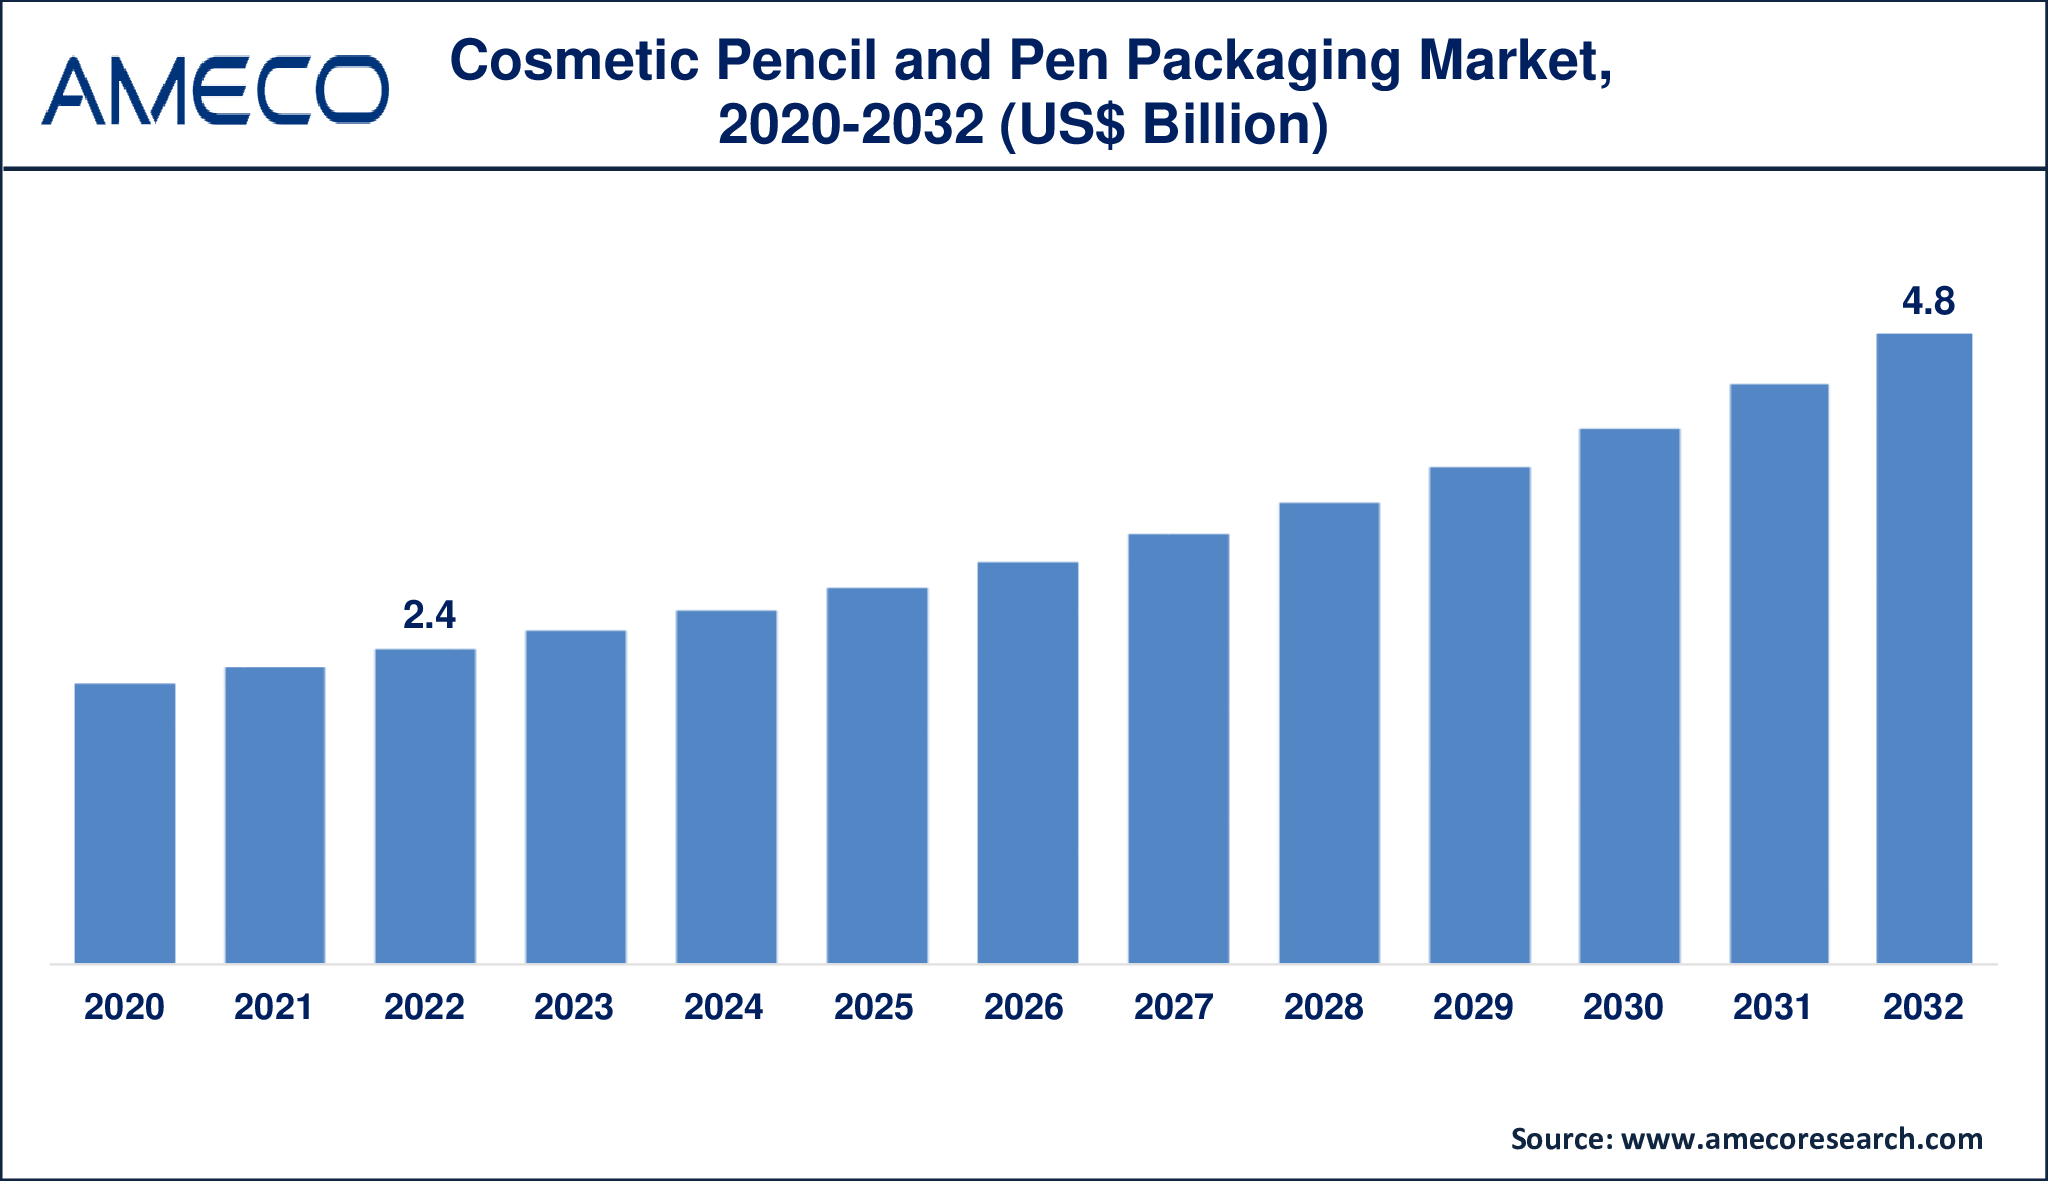 Cosmetic Pencil and Pen Packaging Market Dynamics